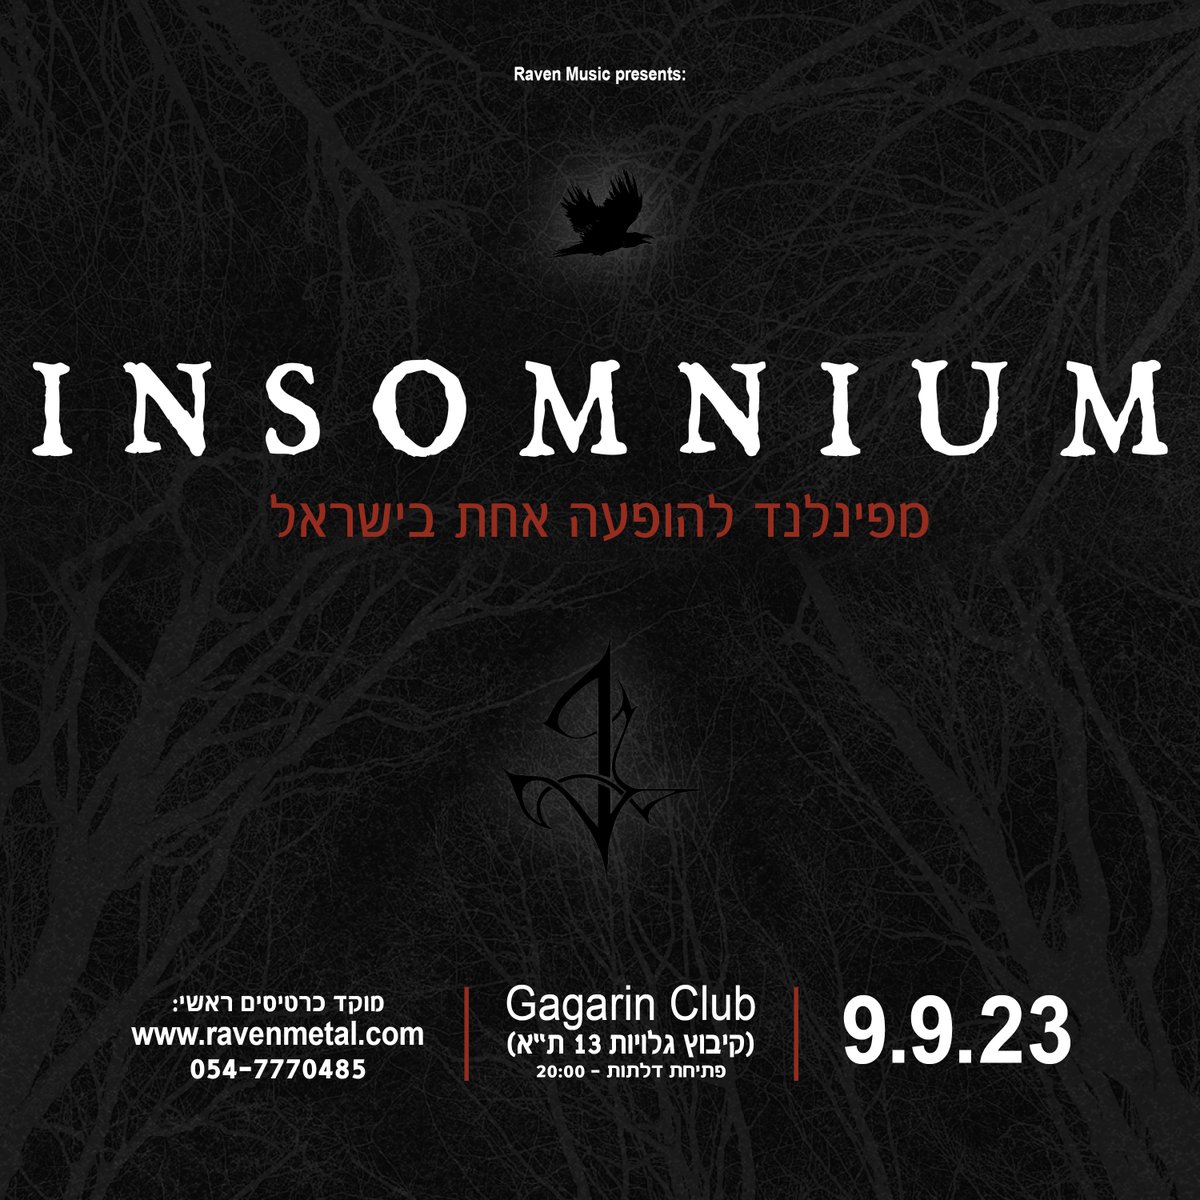 Last call for Istanbul and Tel Aviv, friends! We can’t wait to see you guys next week on September 8th& September 9th - AND this will be our very first time in both cities, so don’t miss out! insomnium.net/tour